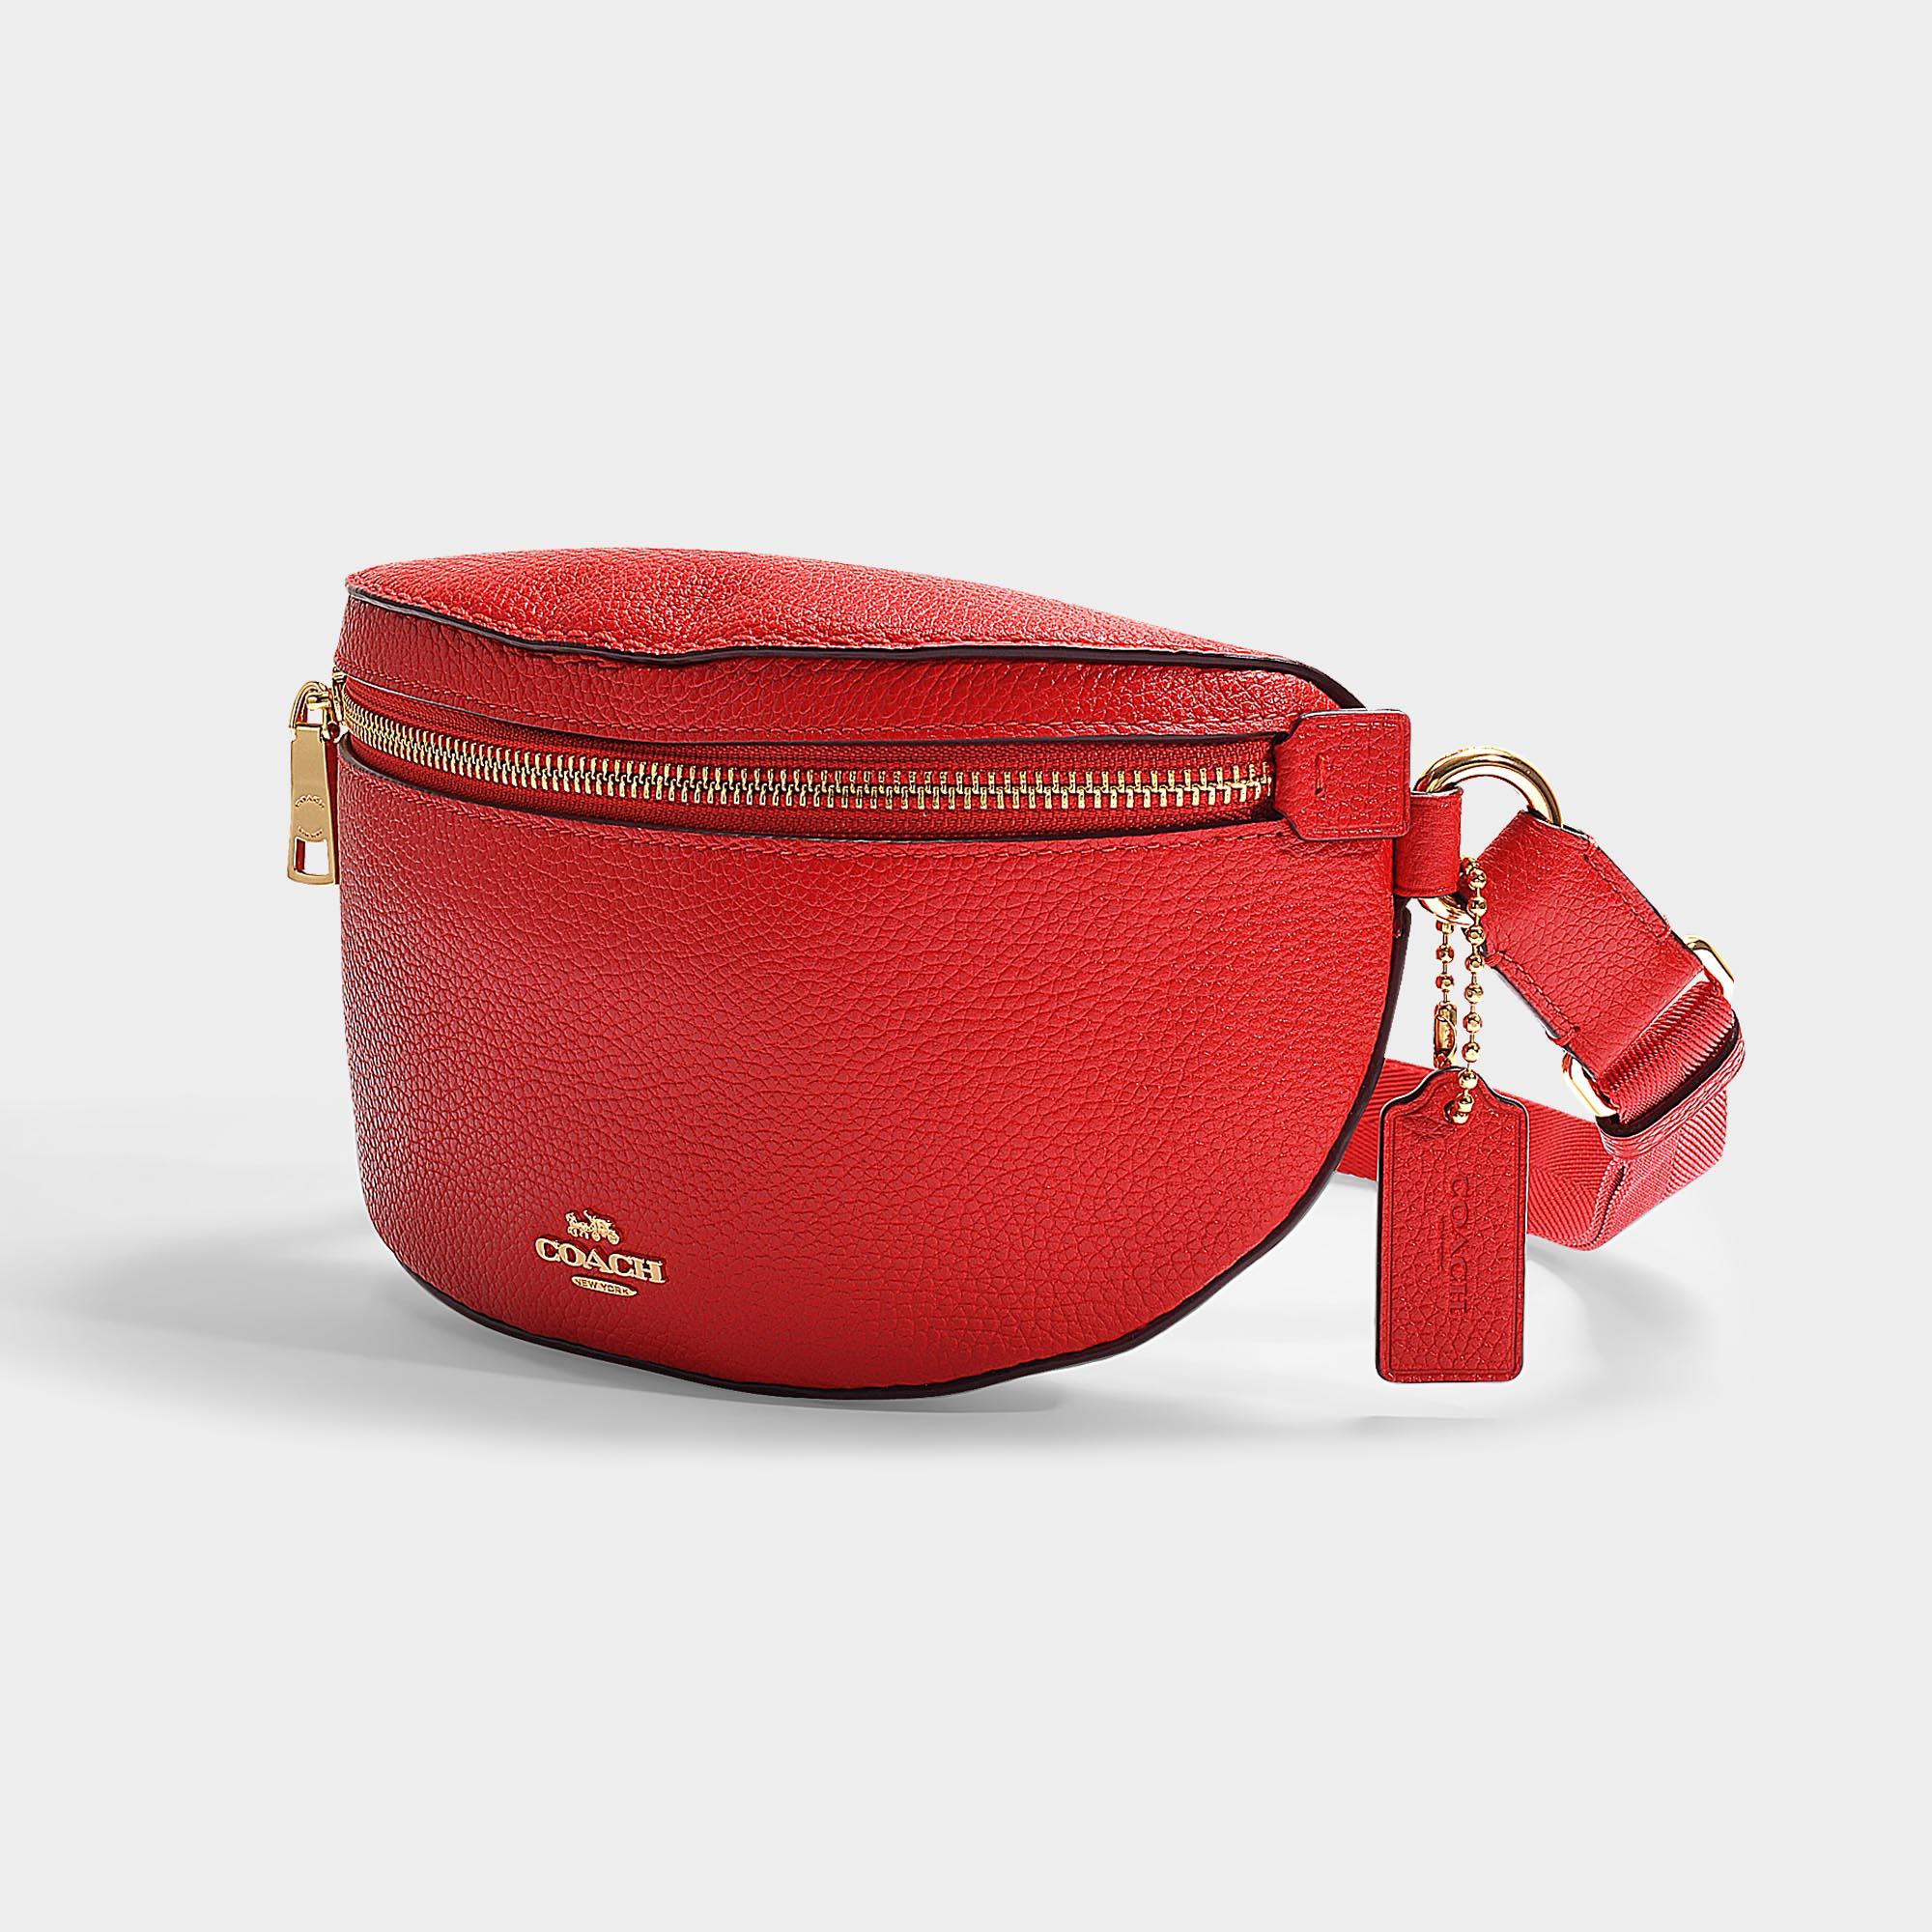 COACH Belt Bag In Jasper Polished Pebble Leather in Red | Lyst